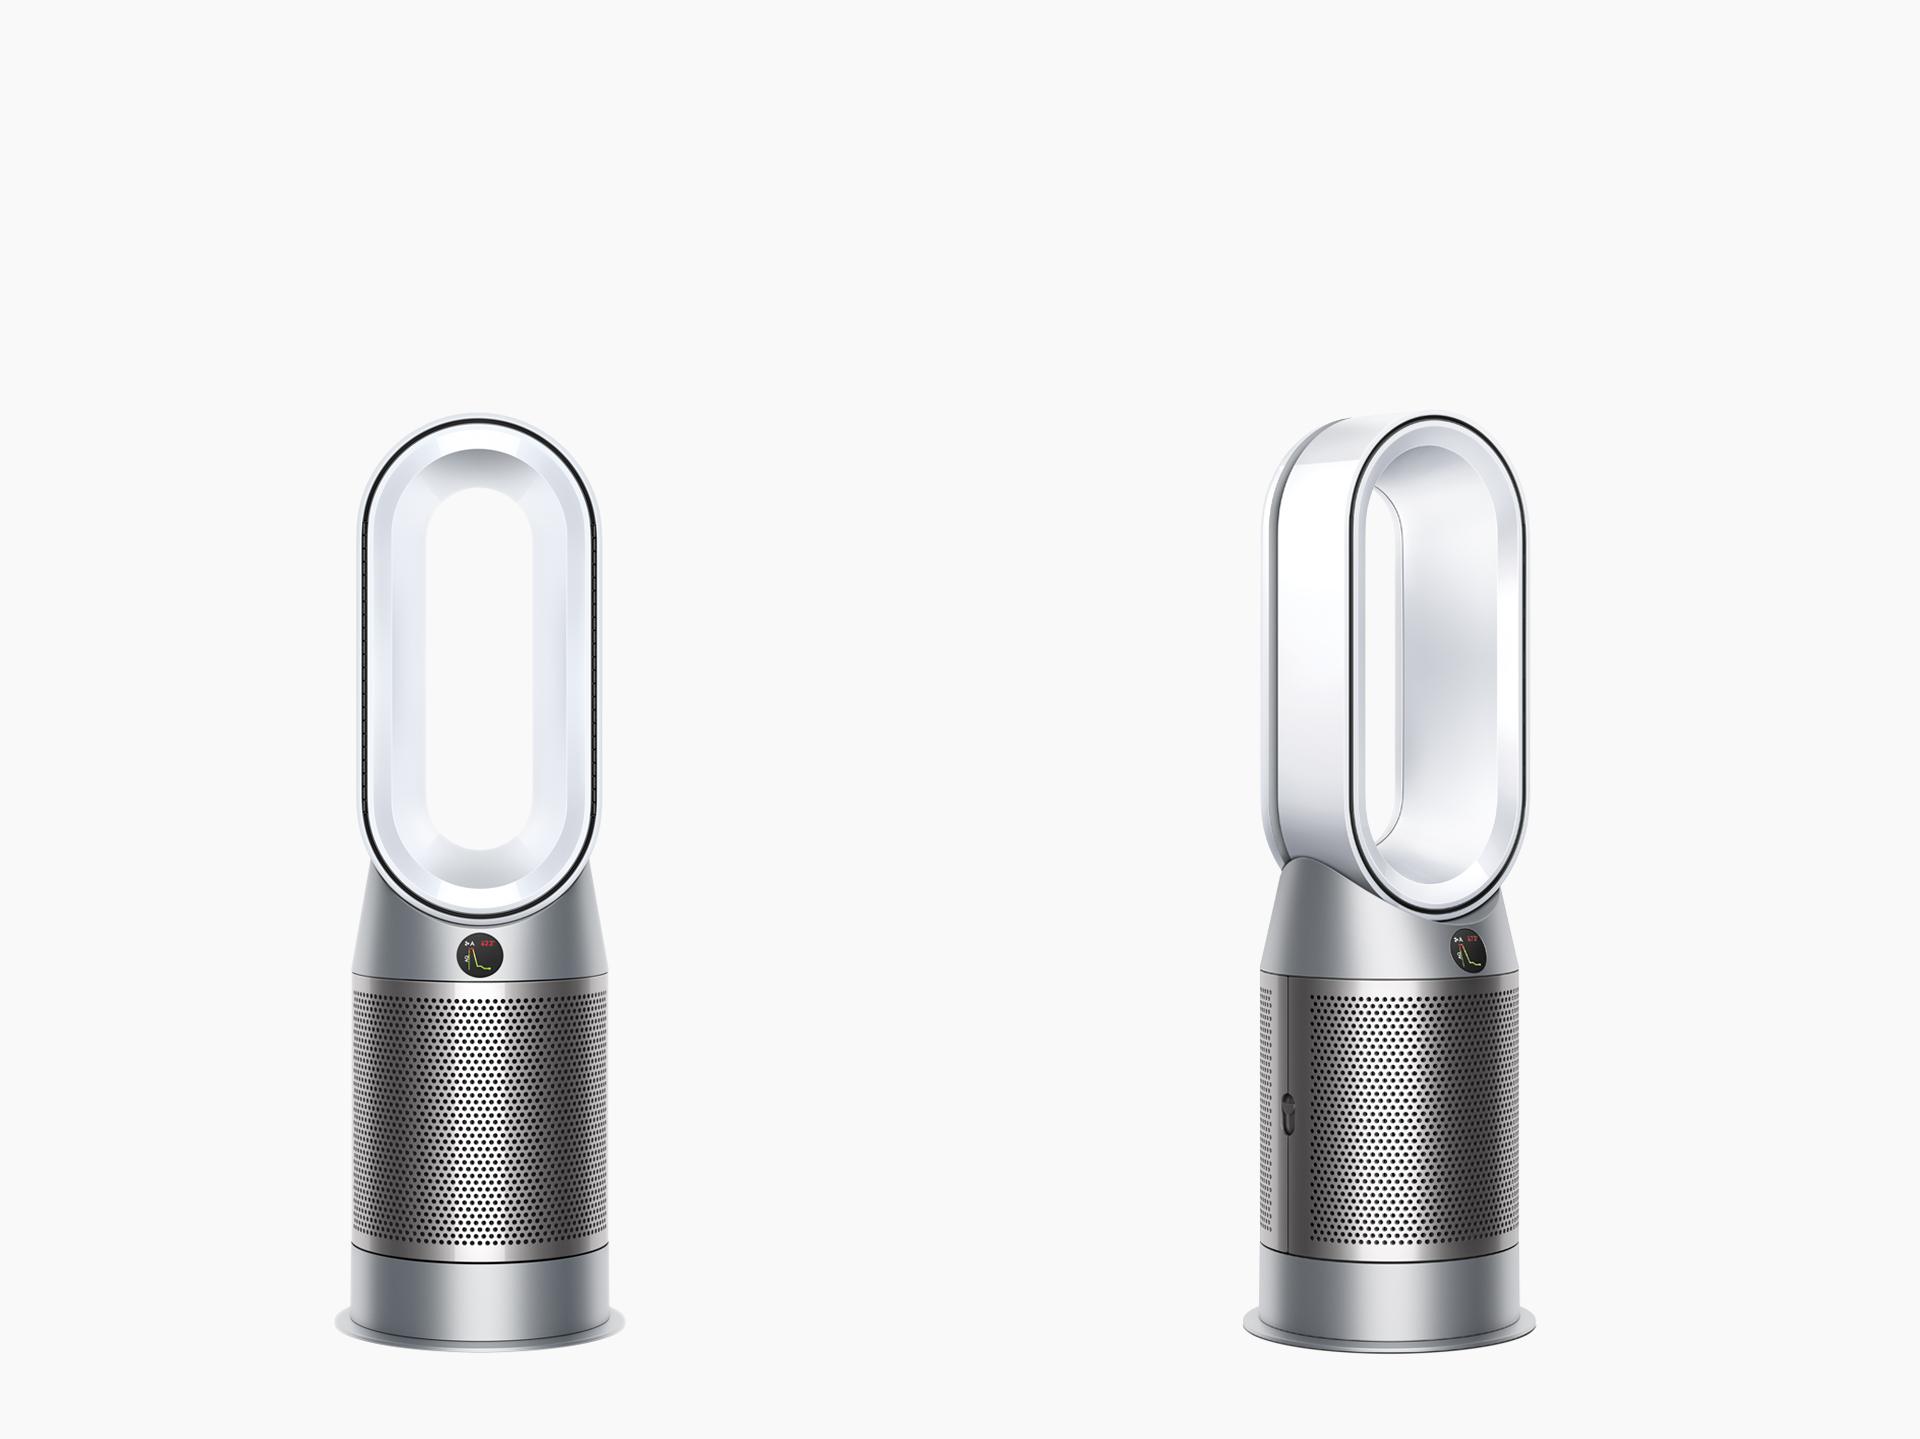 Dyson Purifier Hot+Cool Autoreact fan heater front and side views